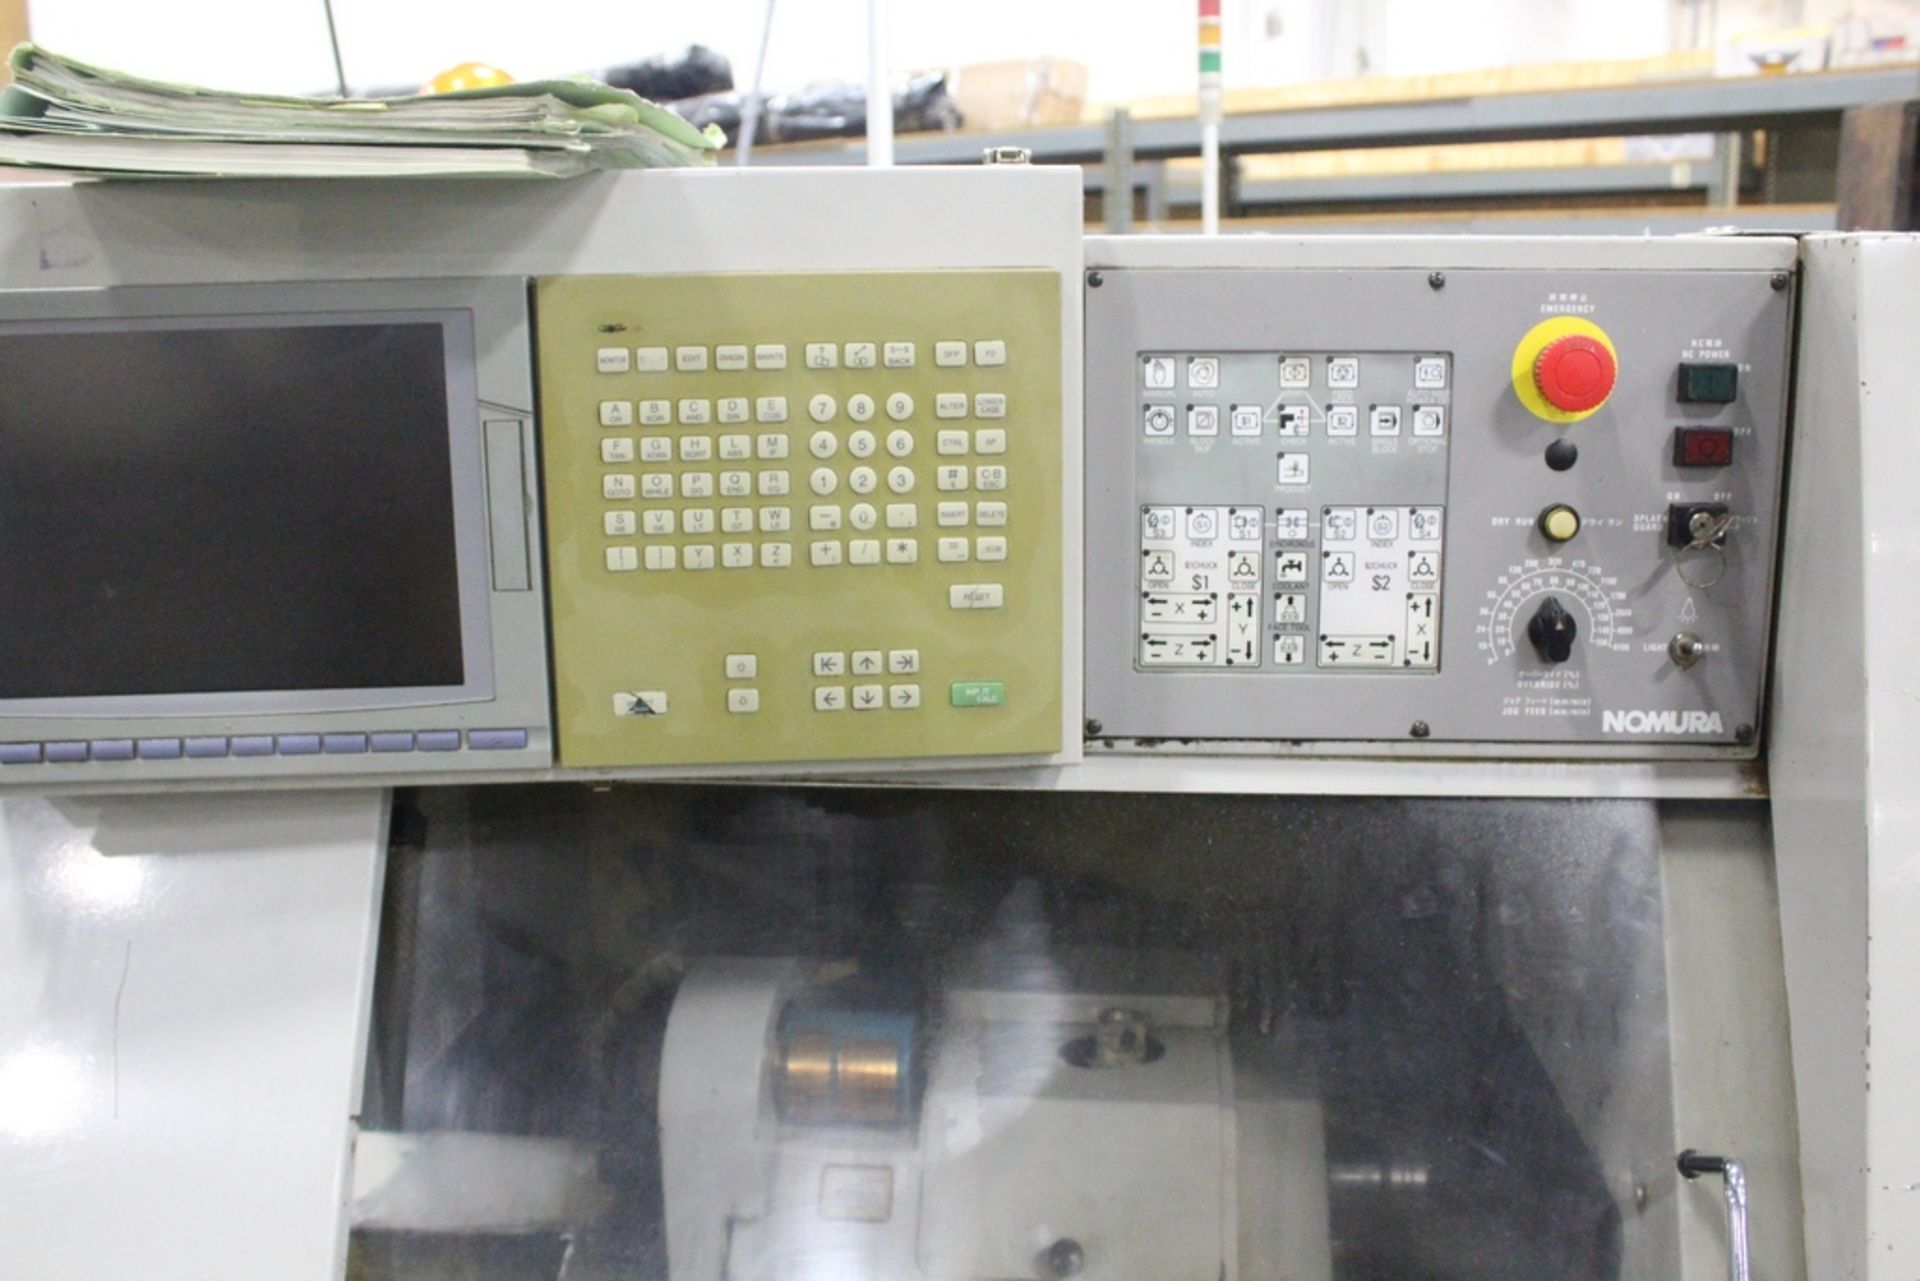 2004 NOMURA NN20B5 CNC SWISS LATHE, SUB SPINDLE, LIVE TOOLING, SN: 25010404, 20-MM, 6-AXIS, 200-MM - Image 2 of 2